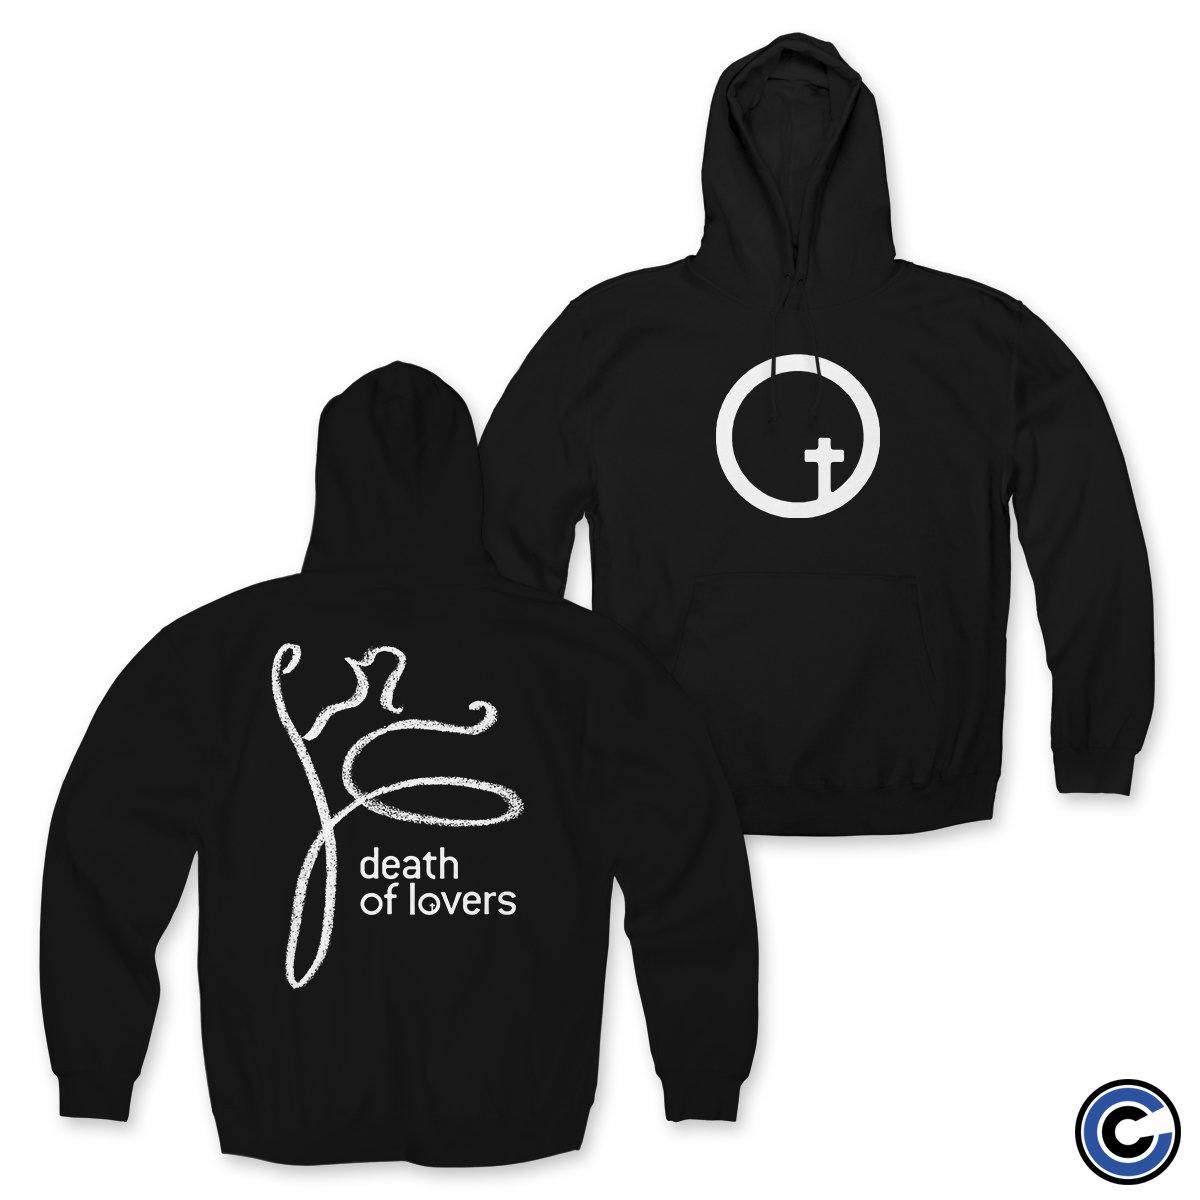 Buy – Death of Lovers "Cross" Hoodie – Band & Music Merch – Cold Cuts Merch